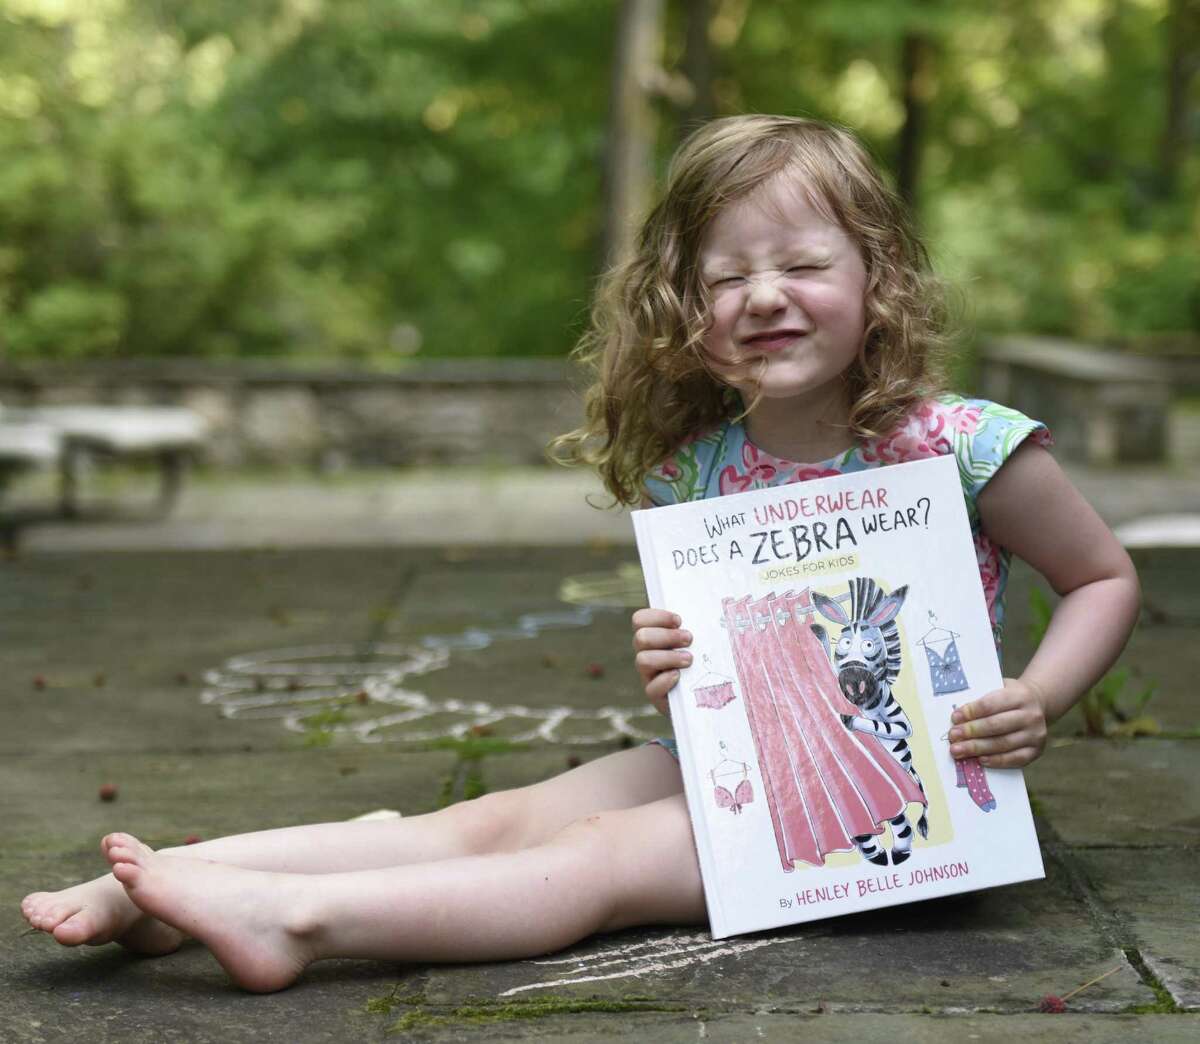 Henley Belle Johnson, 3, shows her new kids joke book “What Underwear Does A Zebra Wear?” at her home in Greenwich on Monday. Elle Muliarchyk and her daughter, Henley, came up with jokes in the new book, which was released in early July and has become an Amazon bestselling children’s joke book.